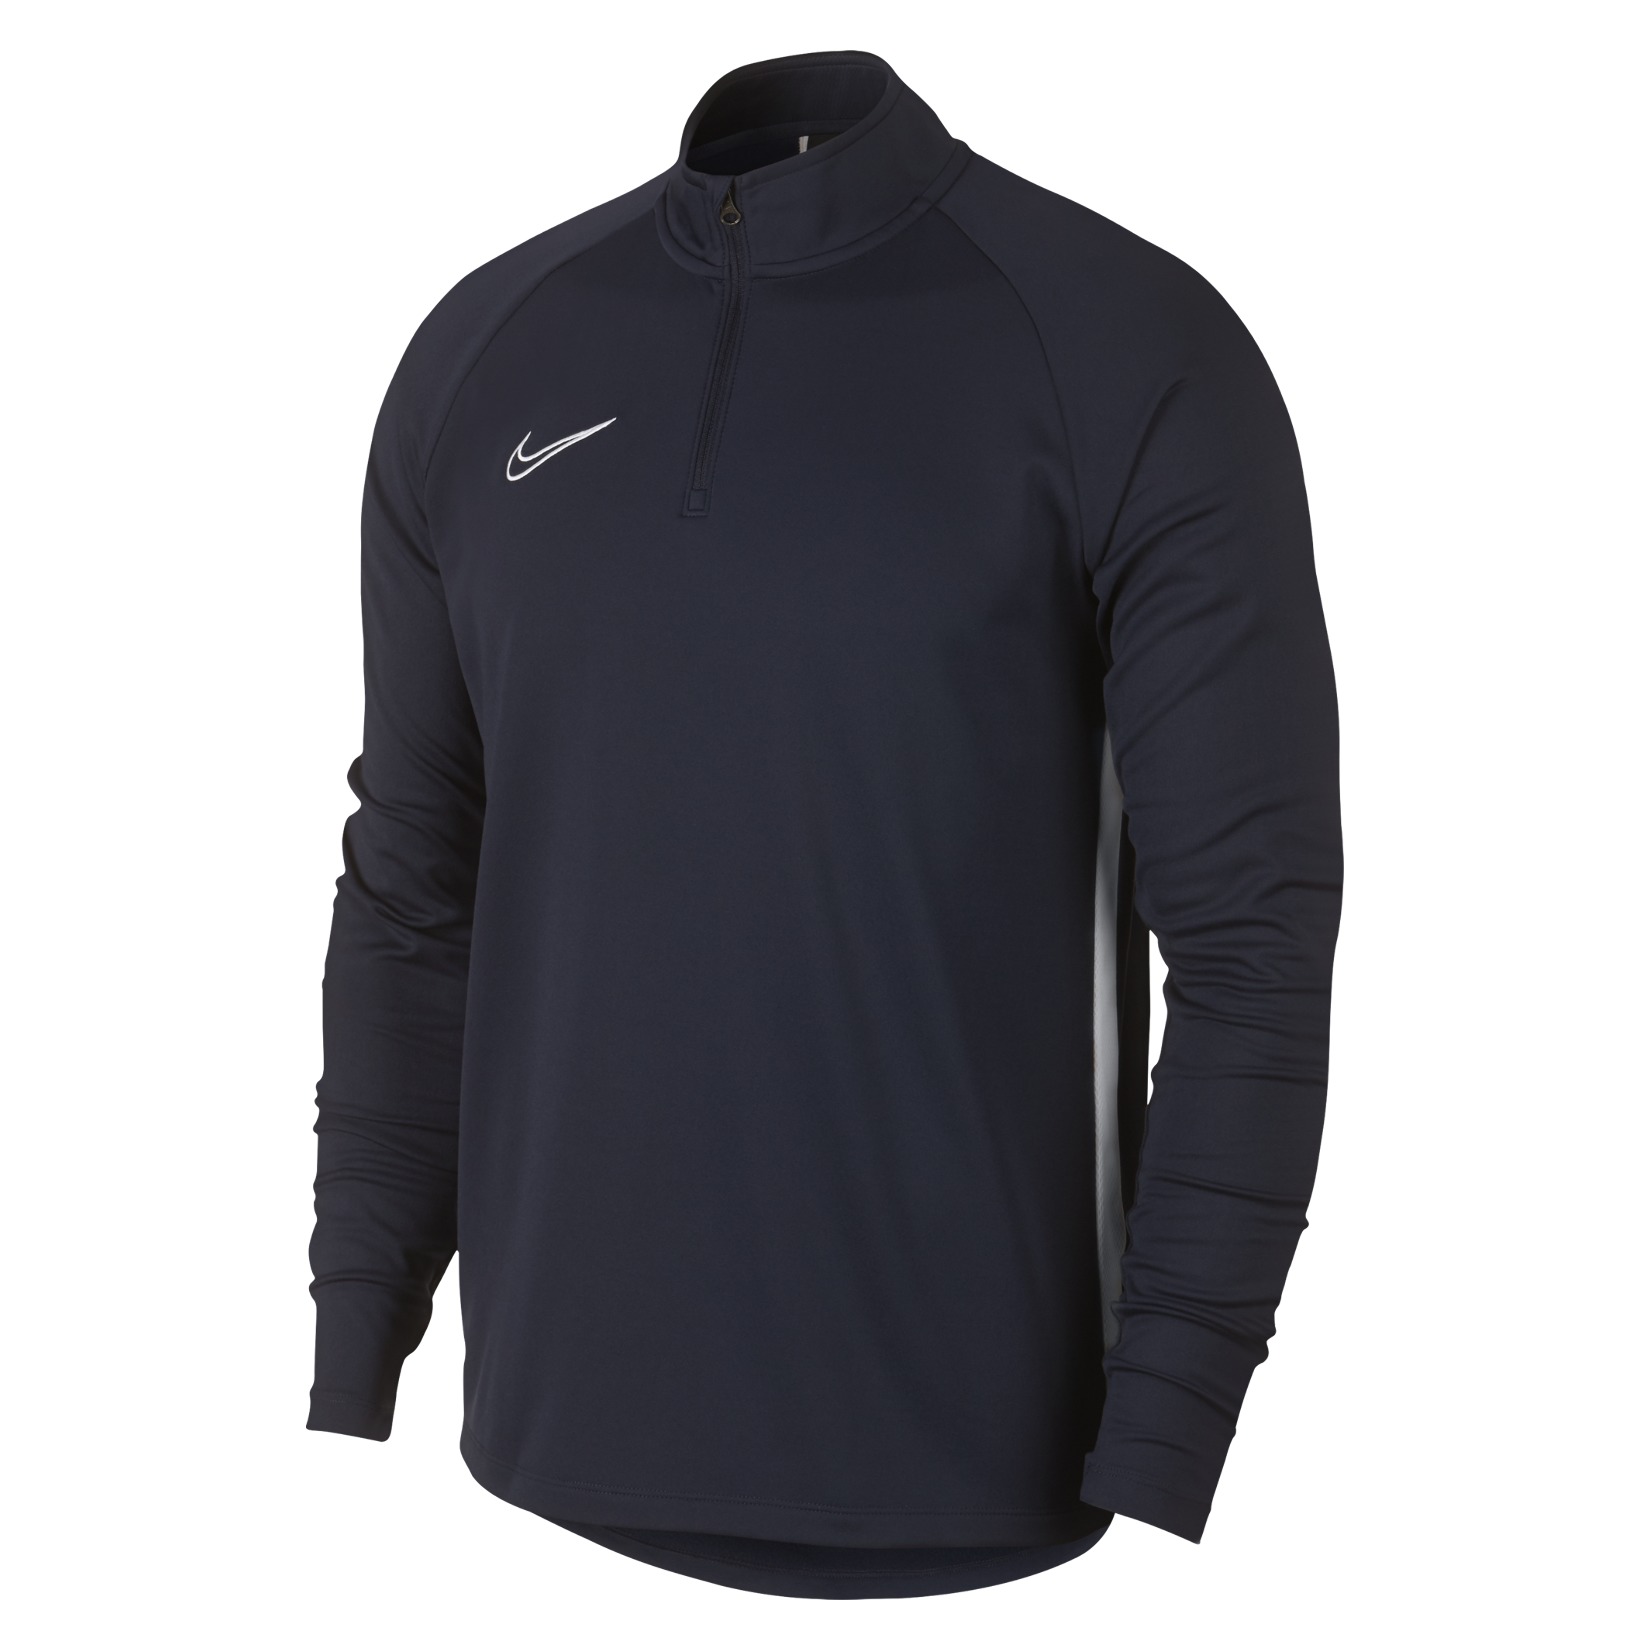 Nike Dry-Fit Academy 1/4 Zip Drill Top